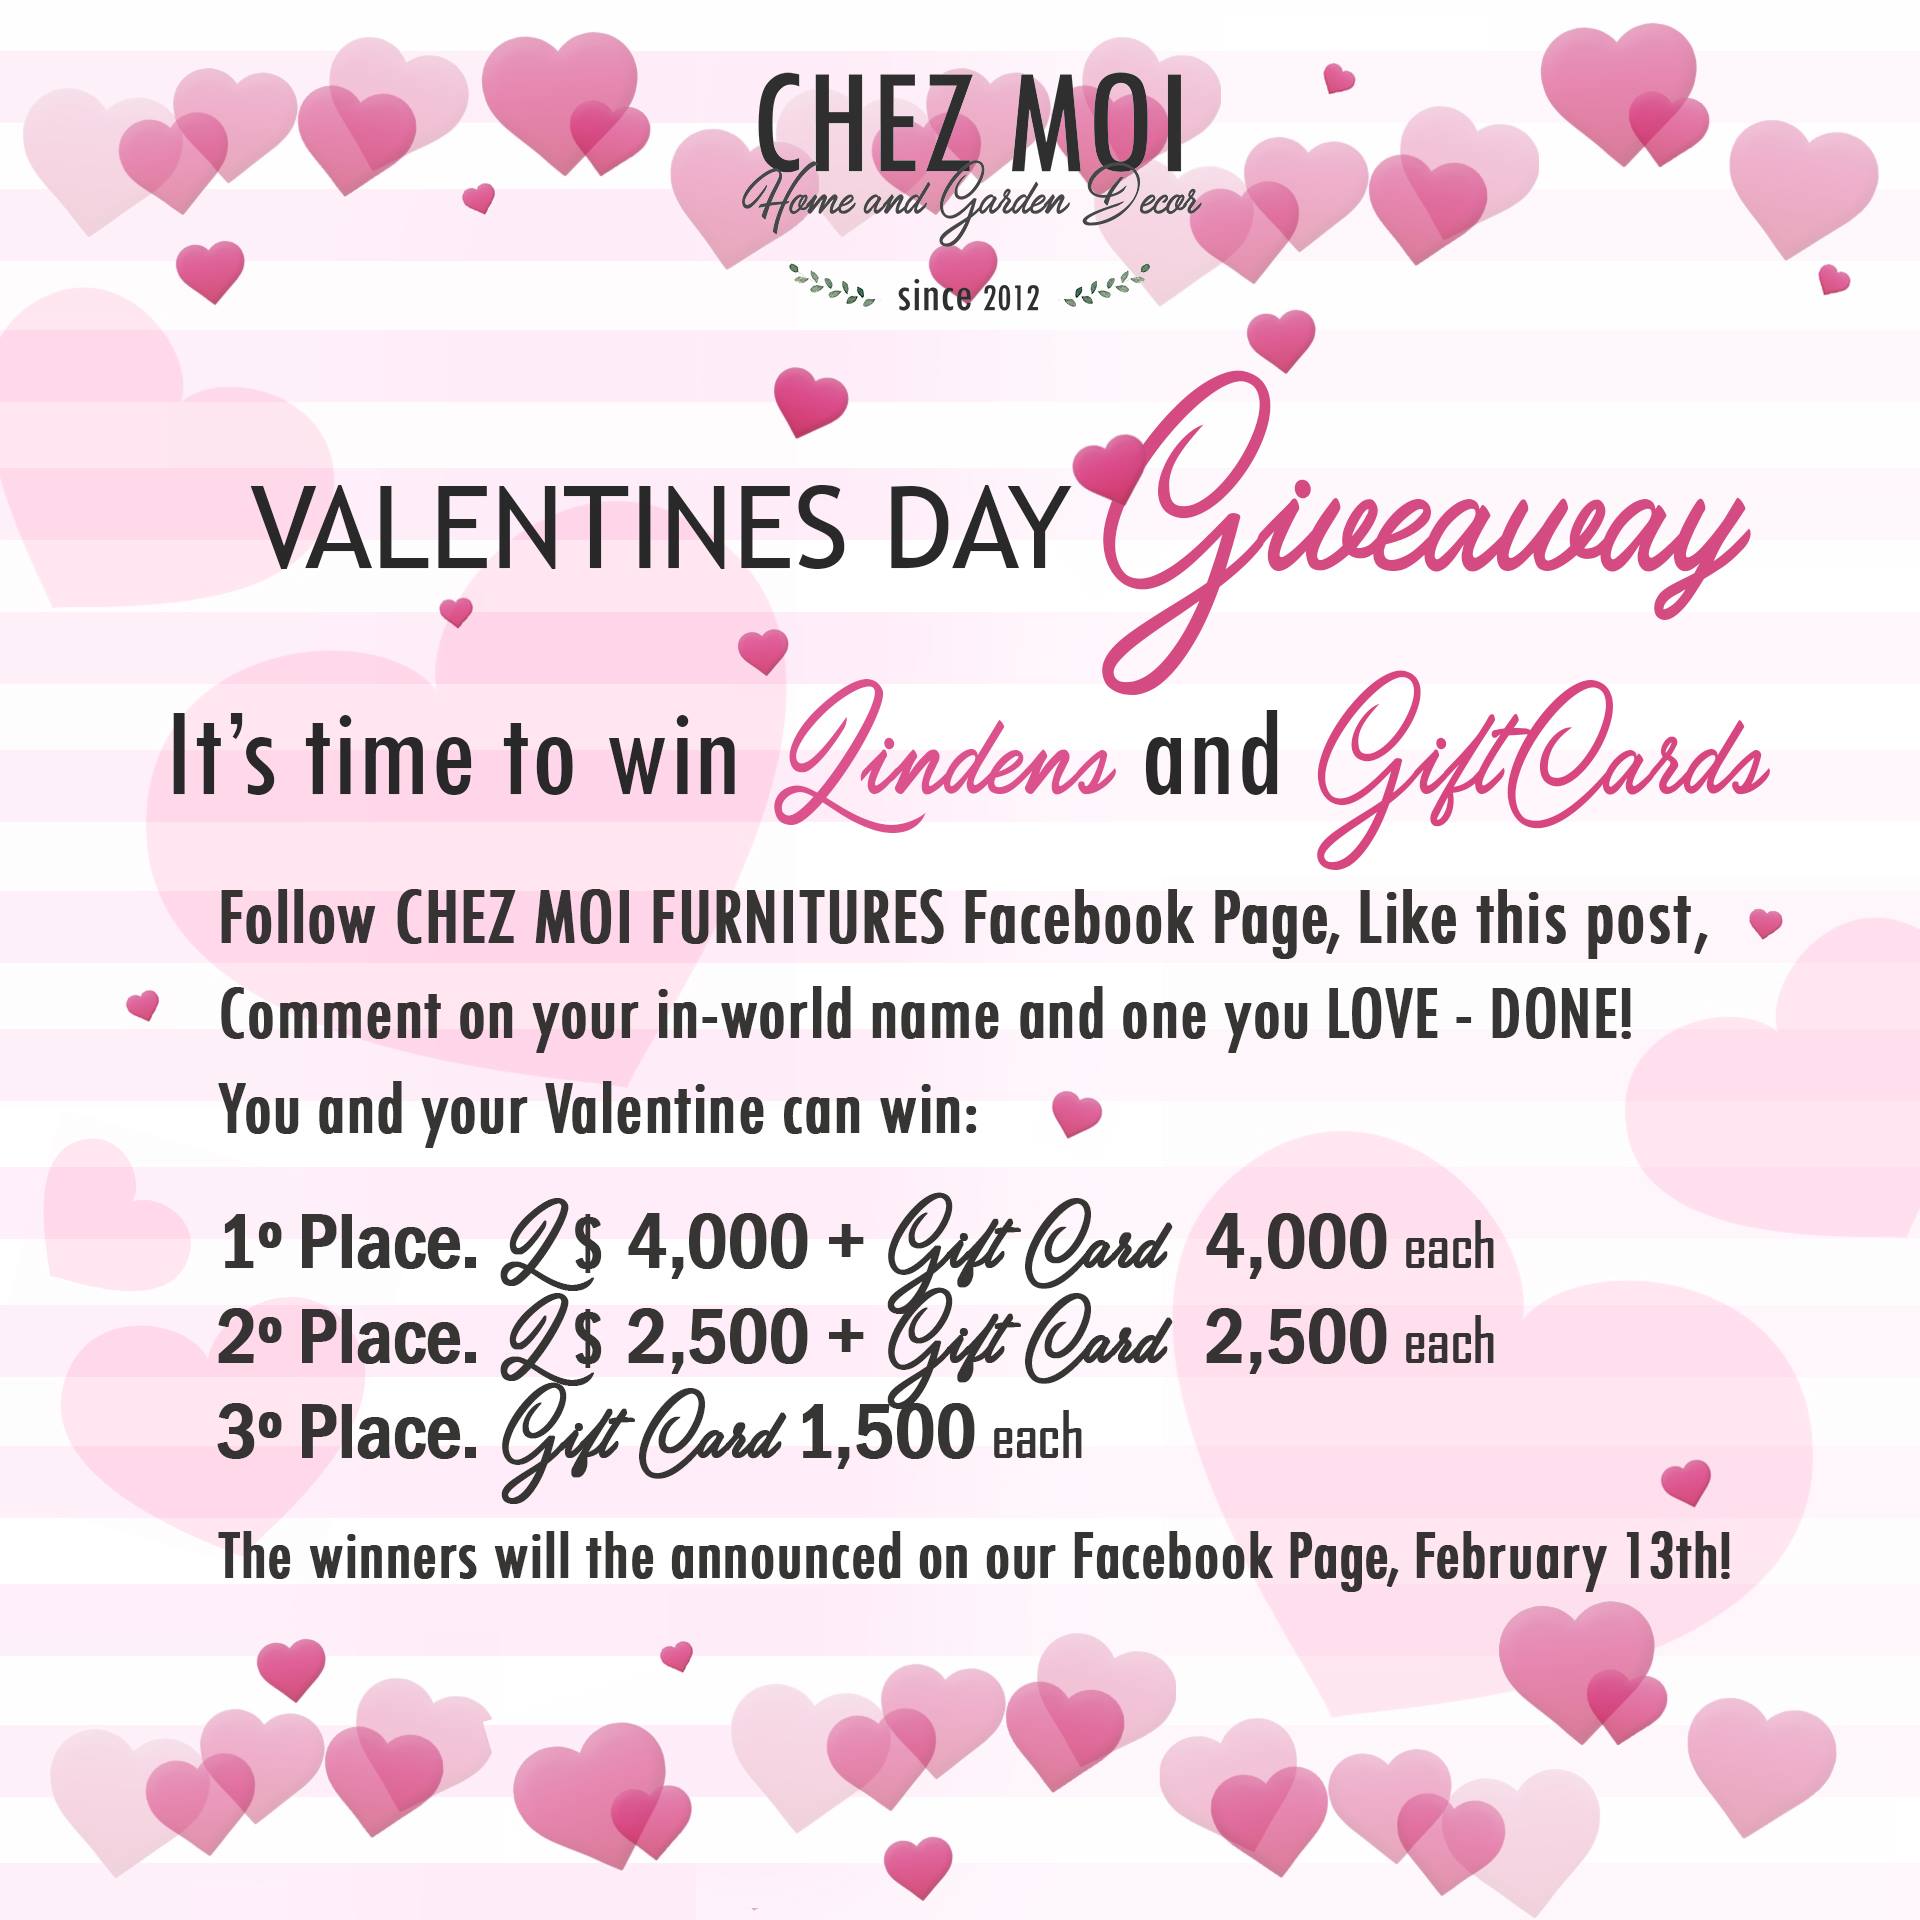 Chez Moi – Valentines Day Giveaway!